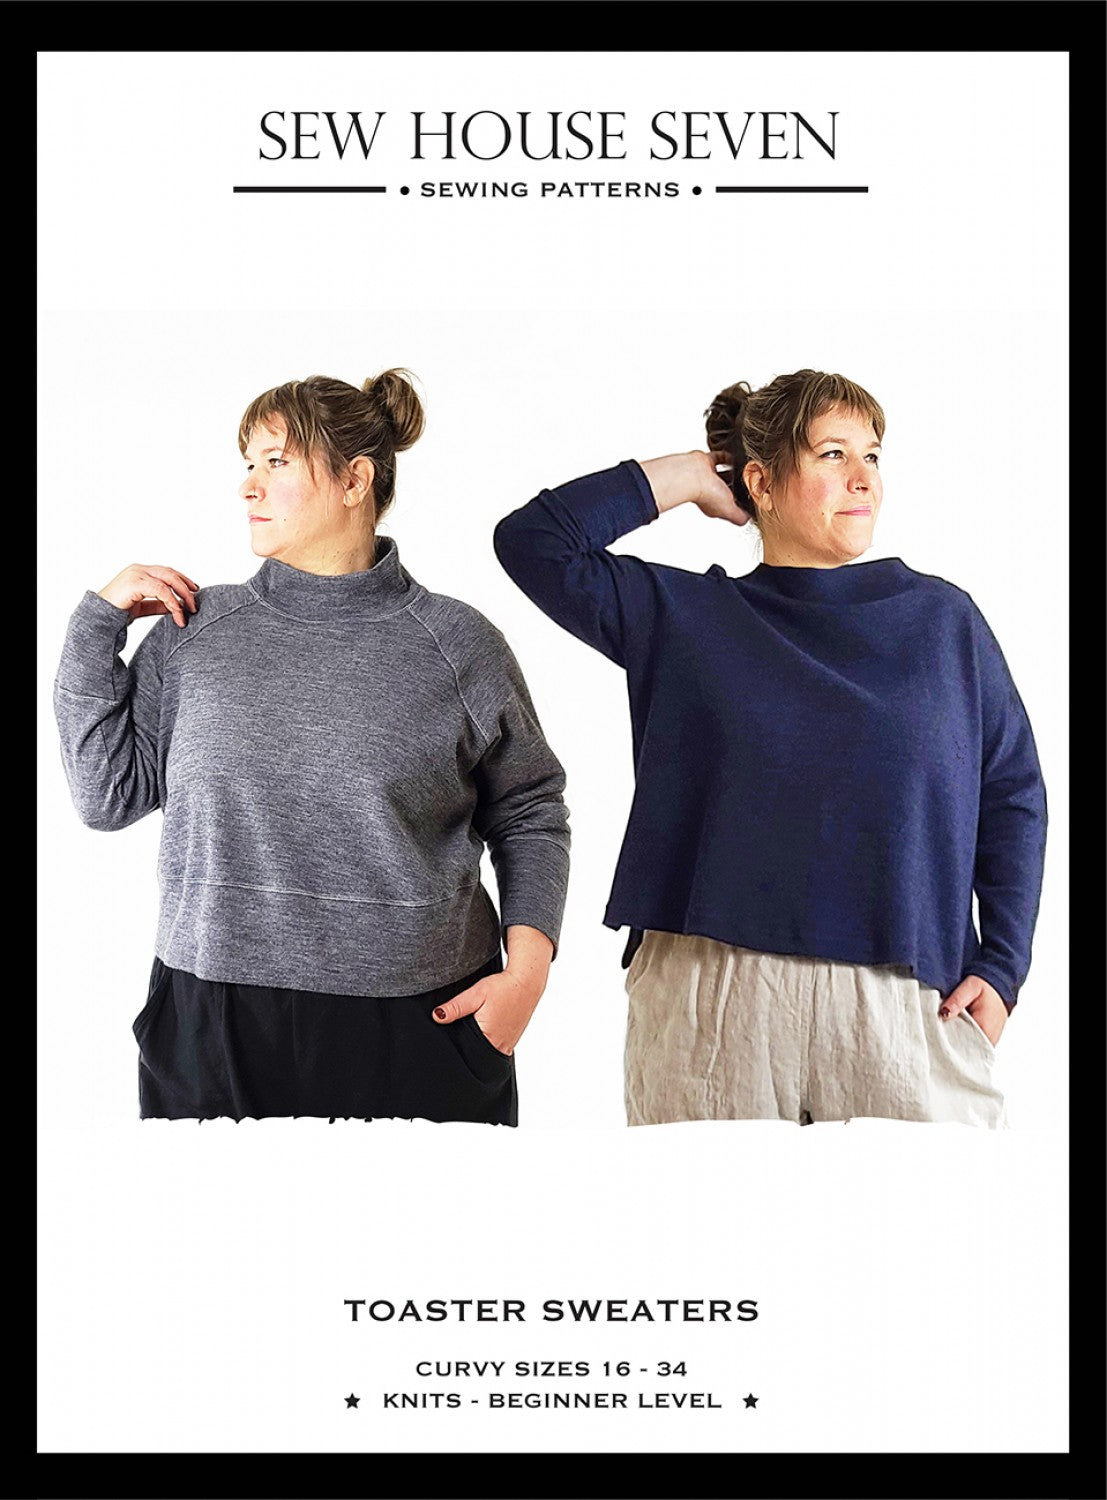 The Toaster Sweaters Curvy 16 - 34 Sewing Pattern by Peggy Mead of Sew House Seven